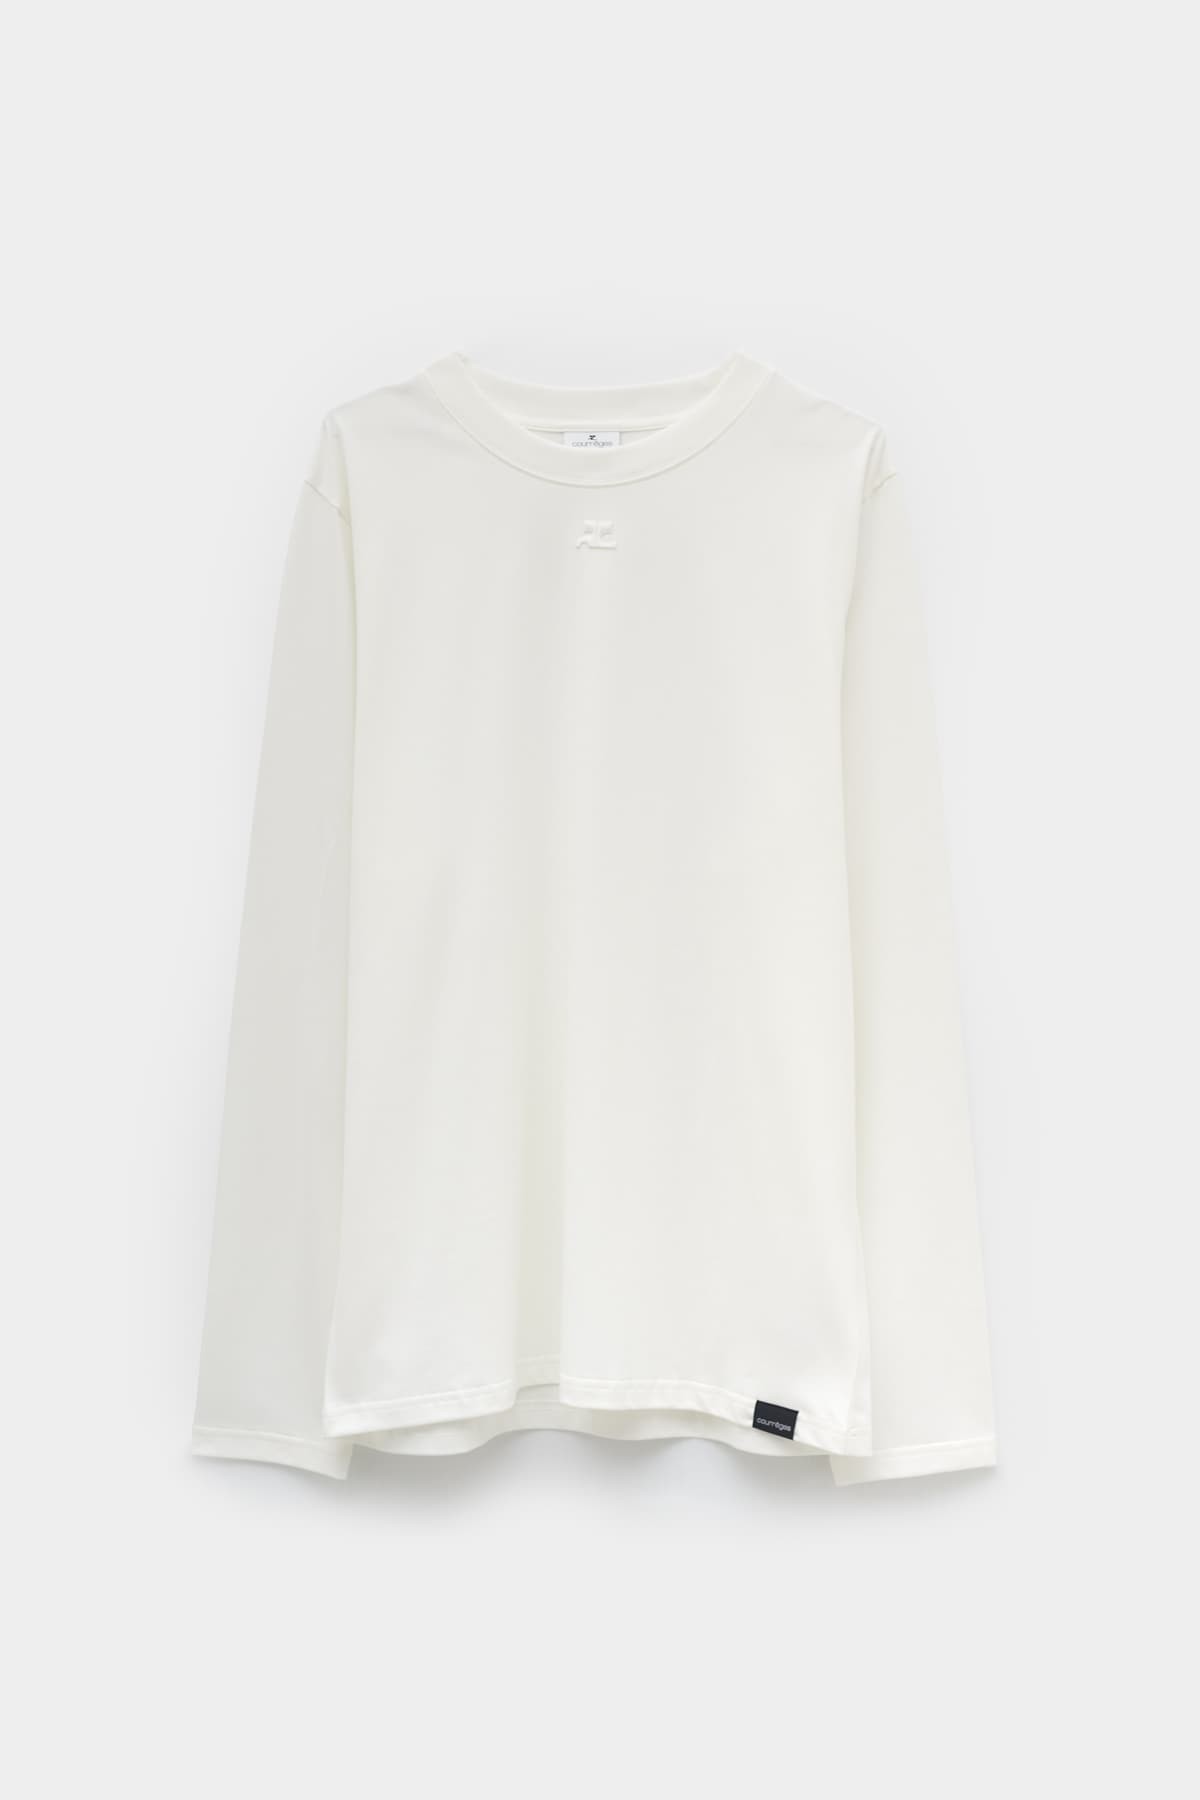 COURREGES HERITAGE WHITE AC STRAIGHT LS T-SHIRT IAMNUE